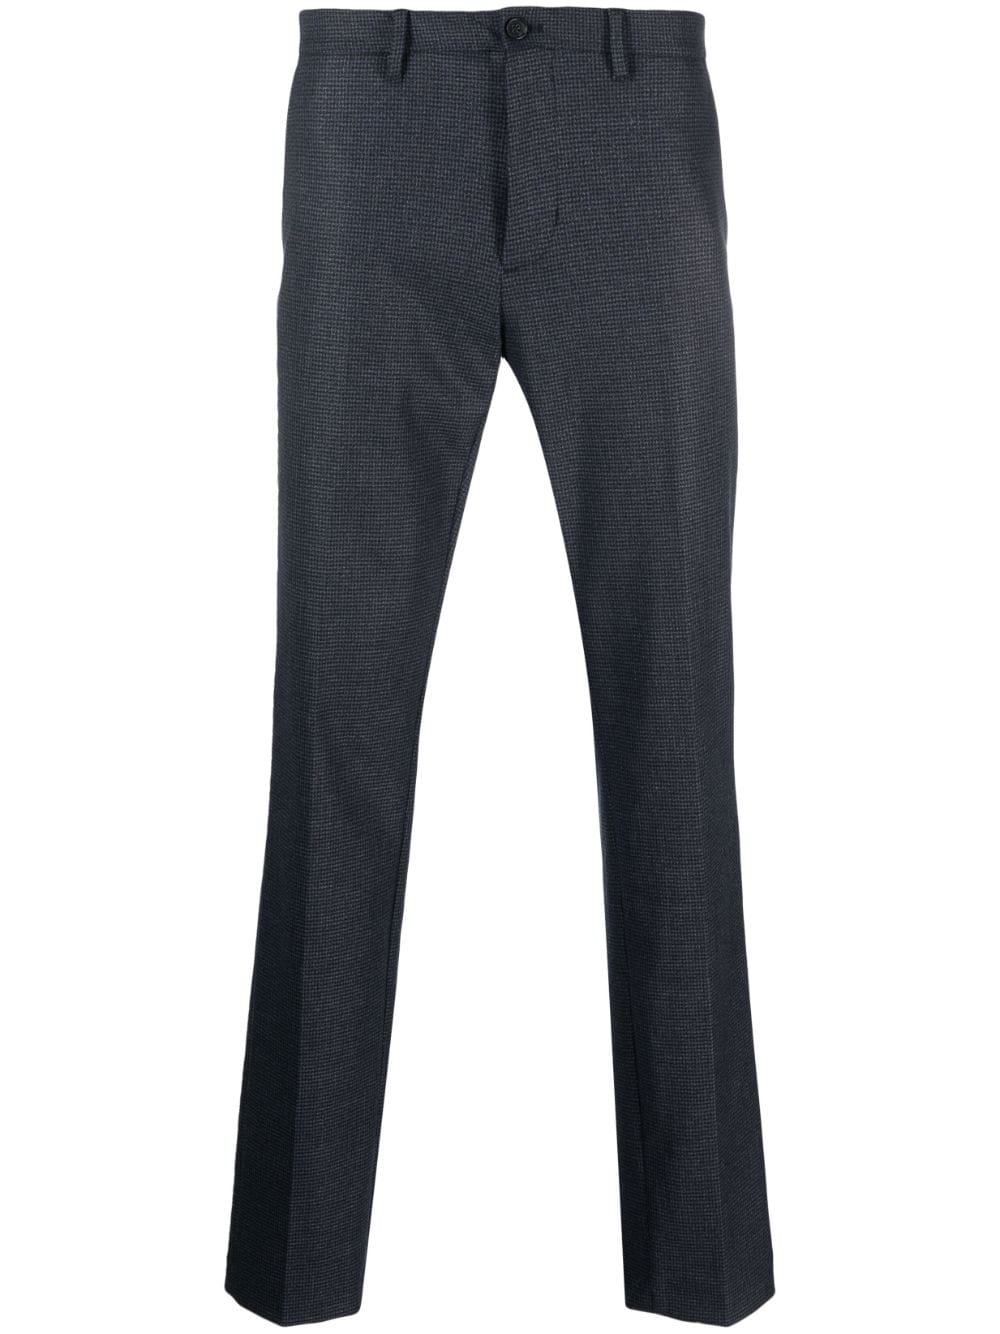 TOMMY HILFIGER SLIM-CUT TAILORED TROUSERS